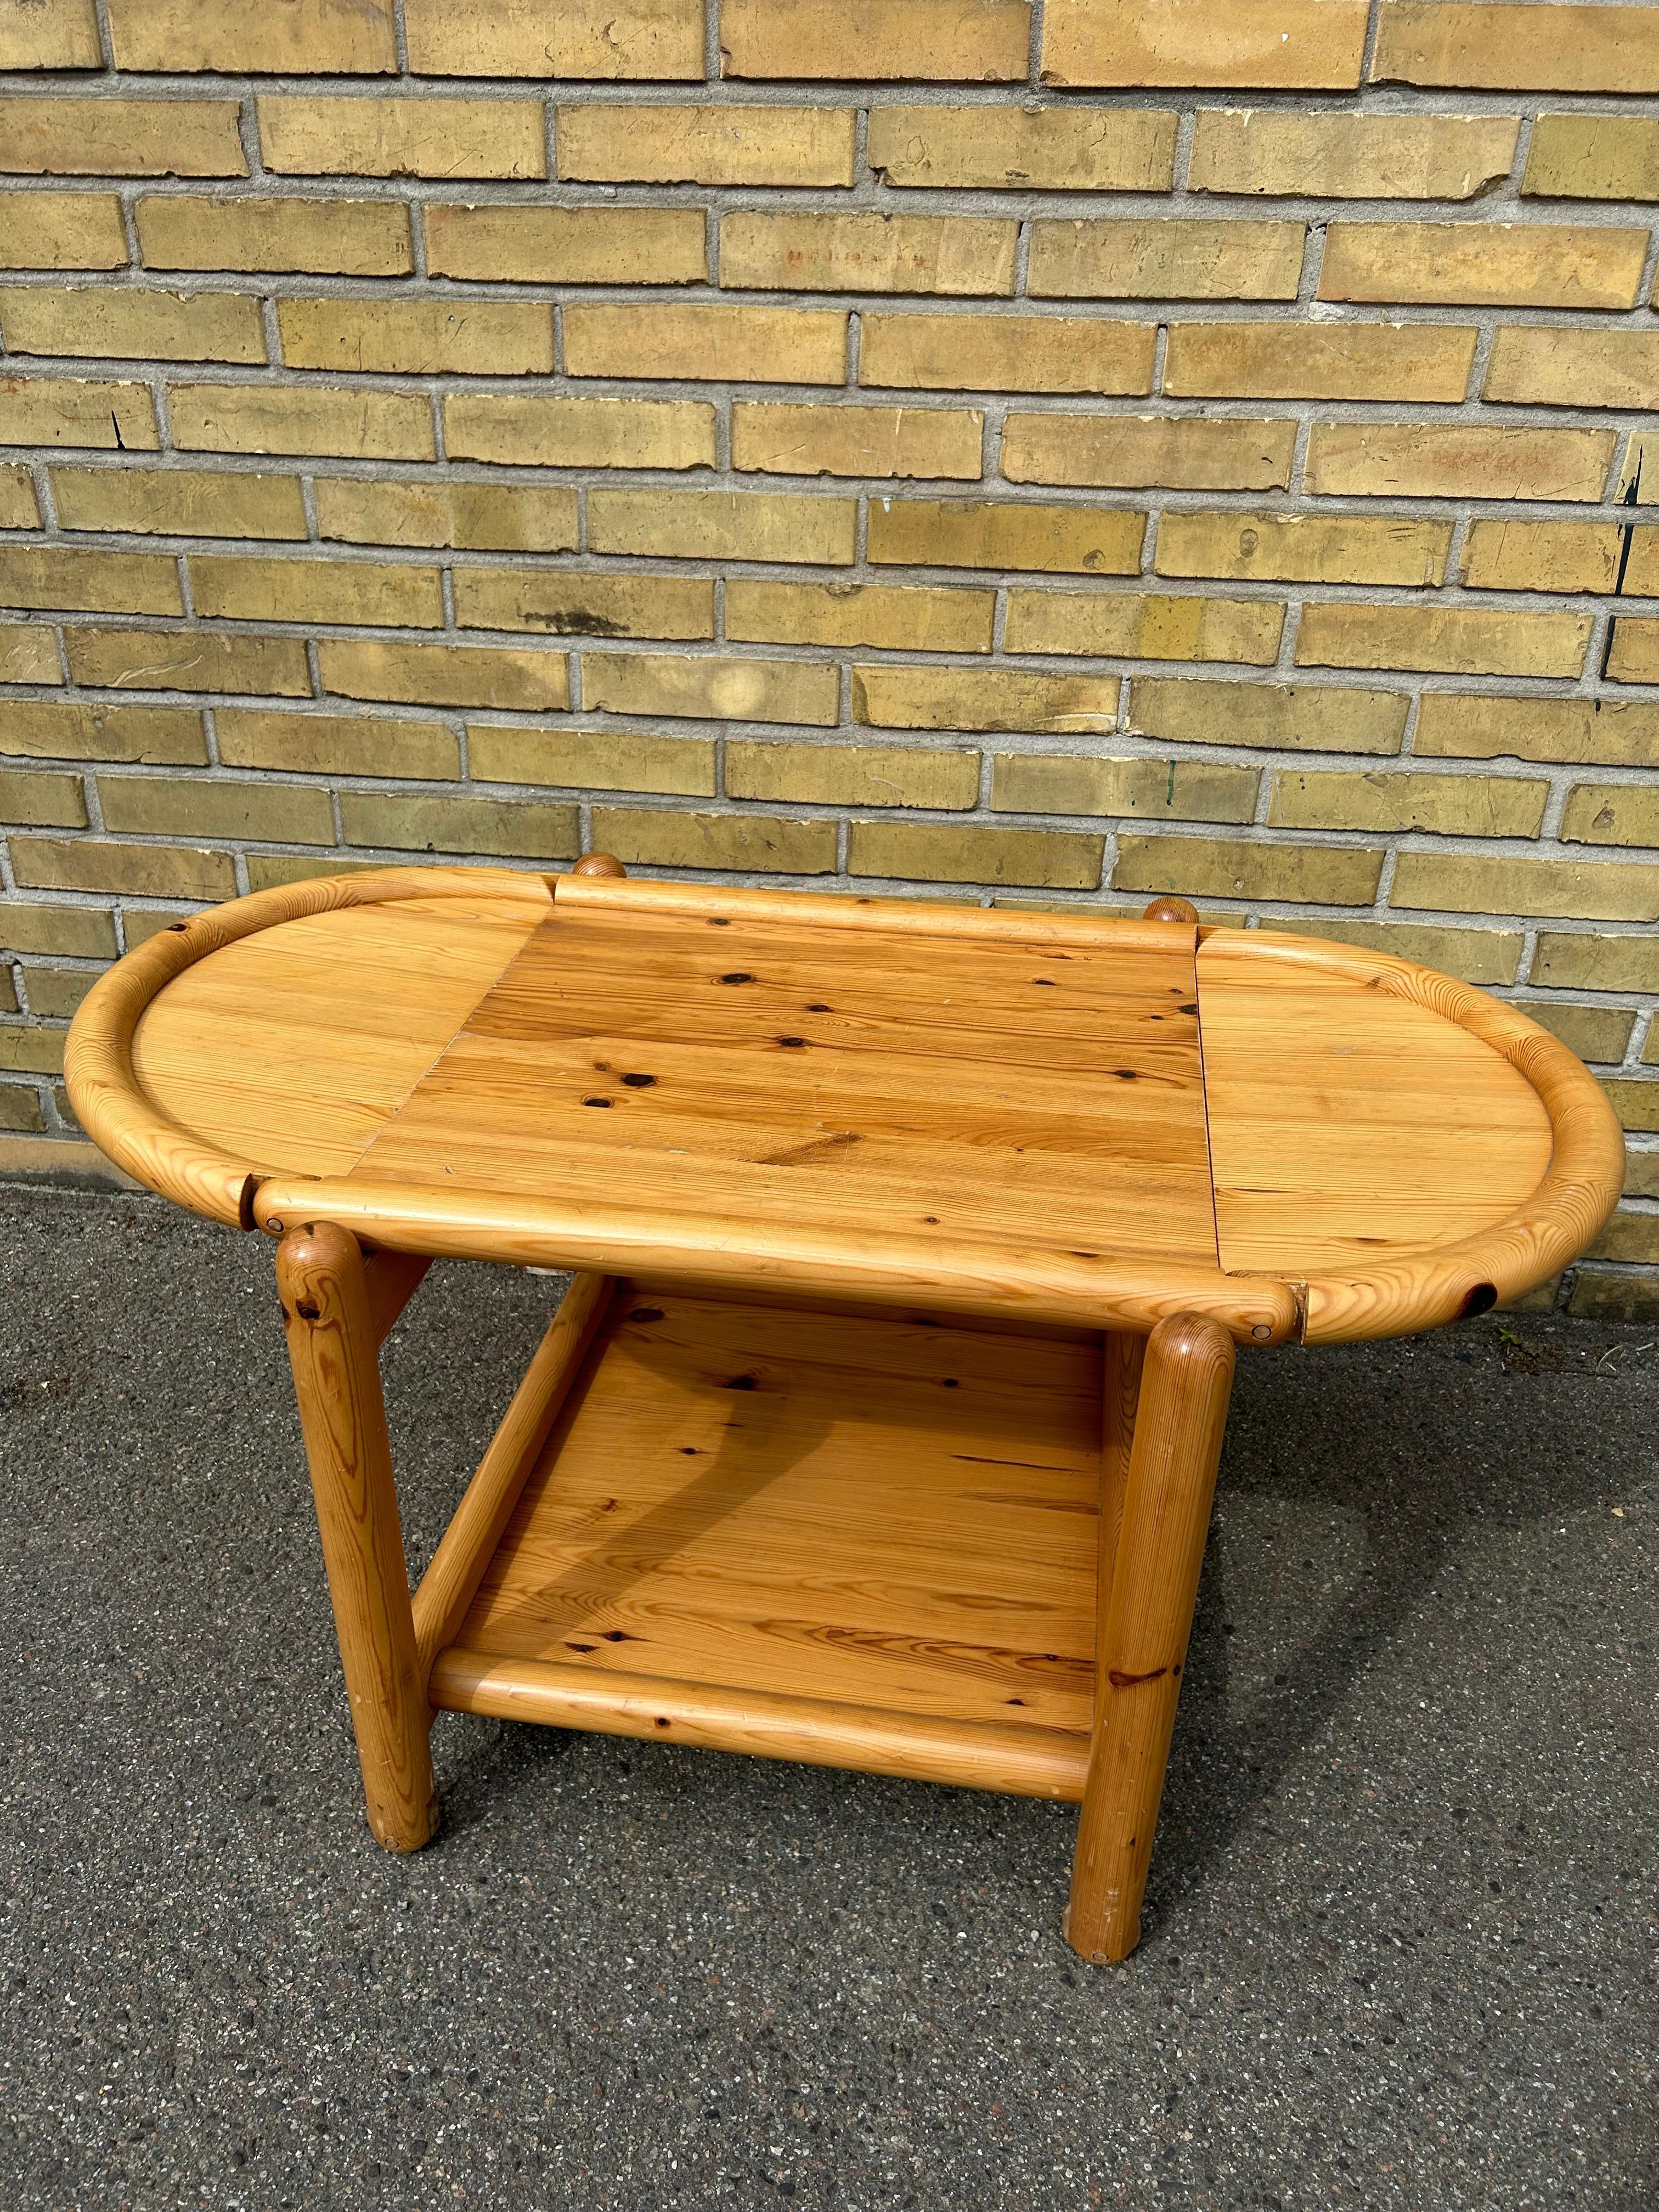 Rare Rainer Daumiller brutalist serving table in solid pine with beautiful wheels also made in wood, the table is made in Denmark in the 1960s.

The serving table is good condition with signs of use and a beautiful patina, the serving table is in